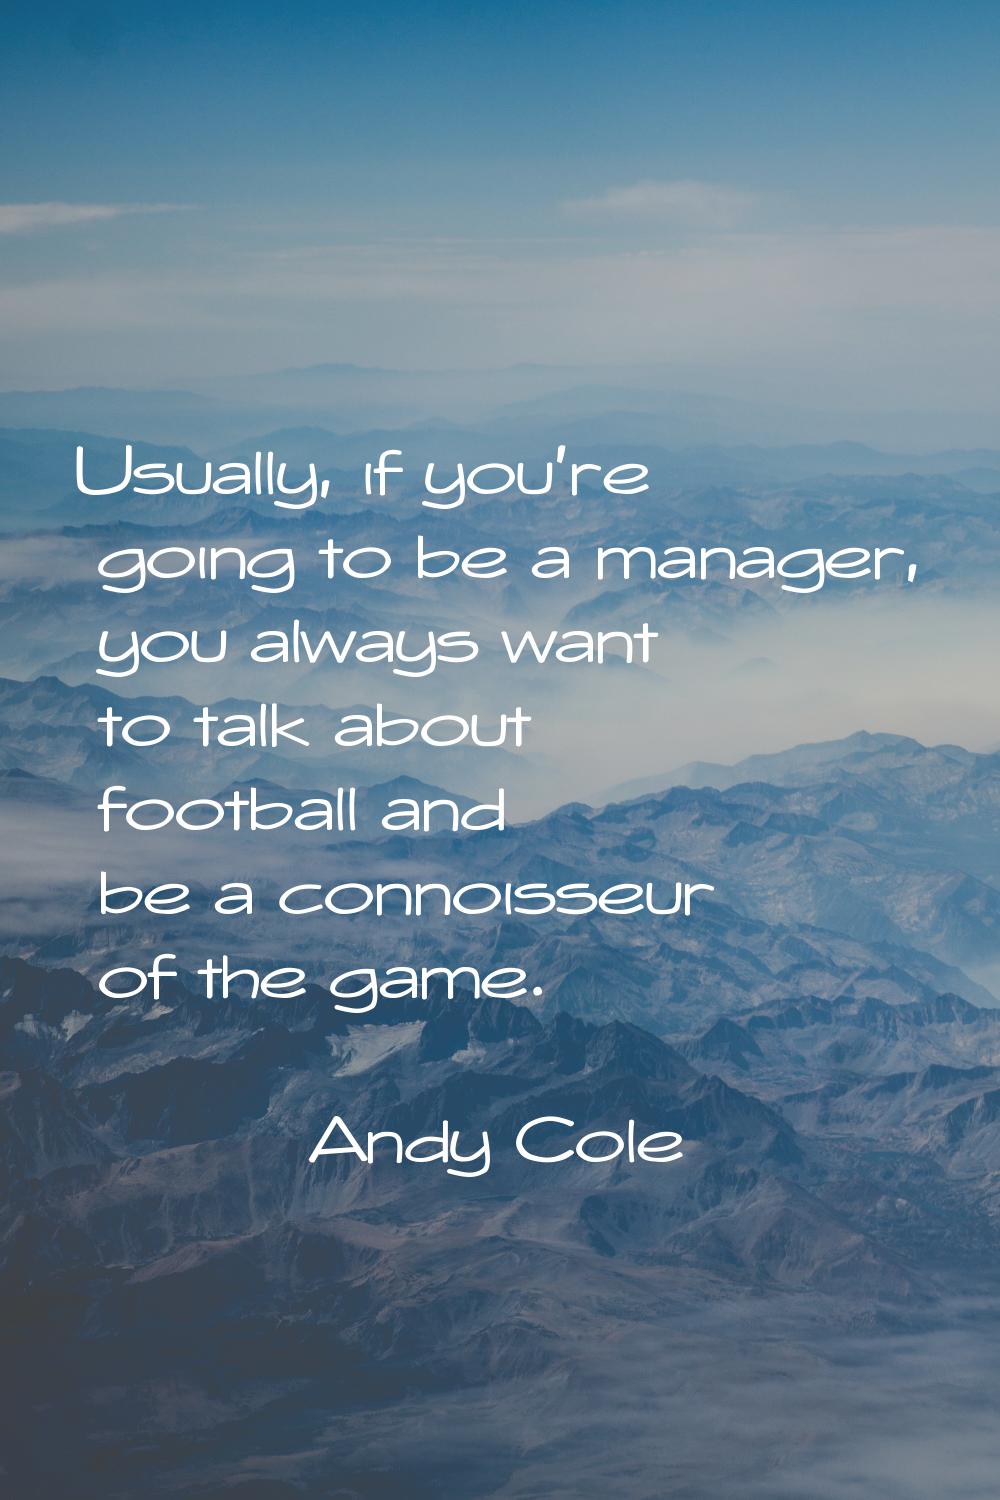 Usually, if you're going to be a manager, you always want to talk about football and be a connoisse